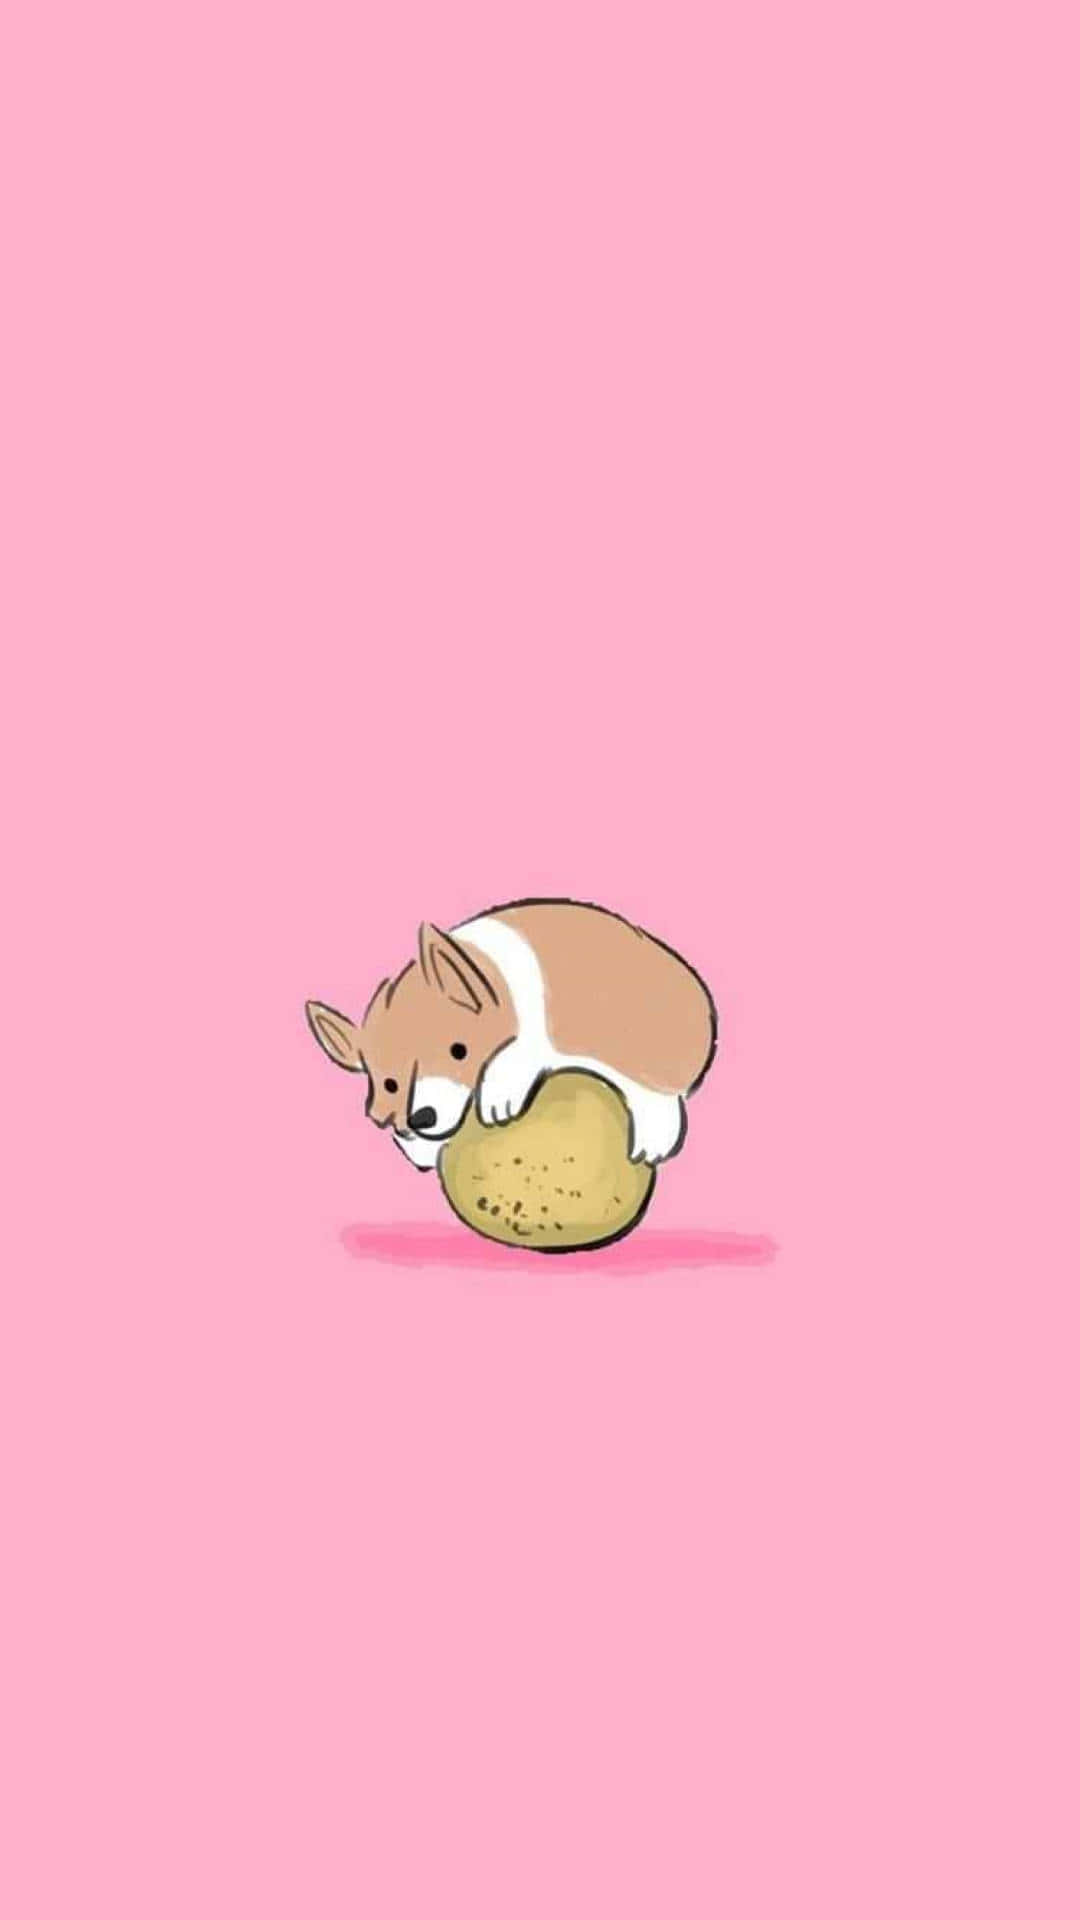 A Dog Is Sleeping On A Pink Background